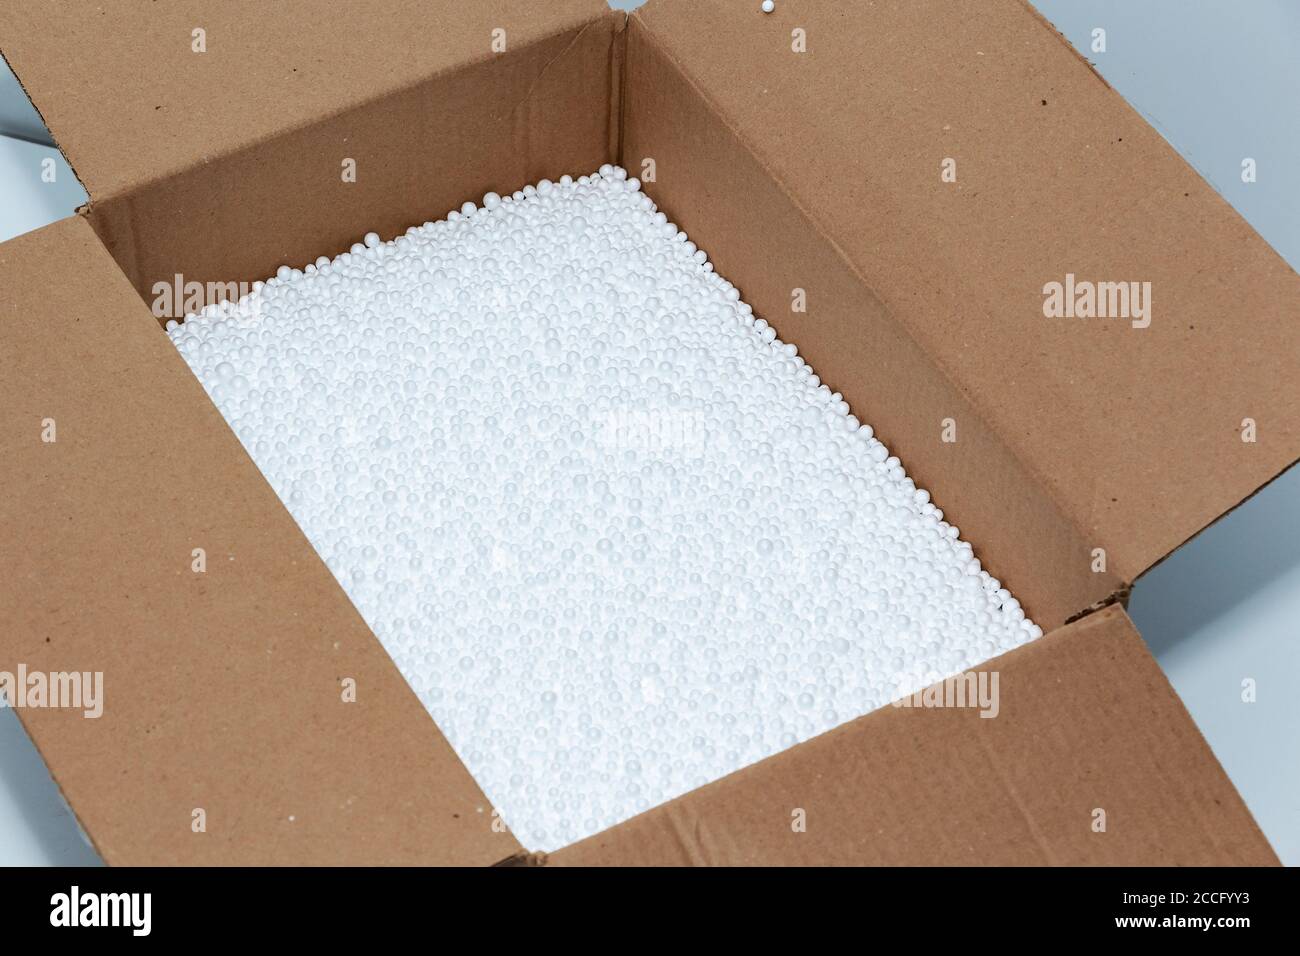 Round foam balls in a cardboard box. Environmental protection. Stock Photo